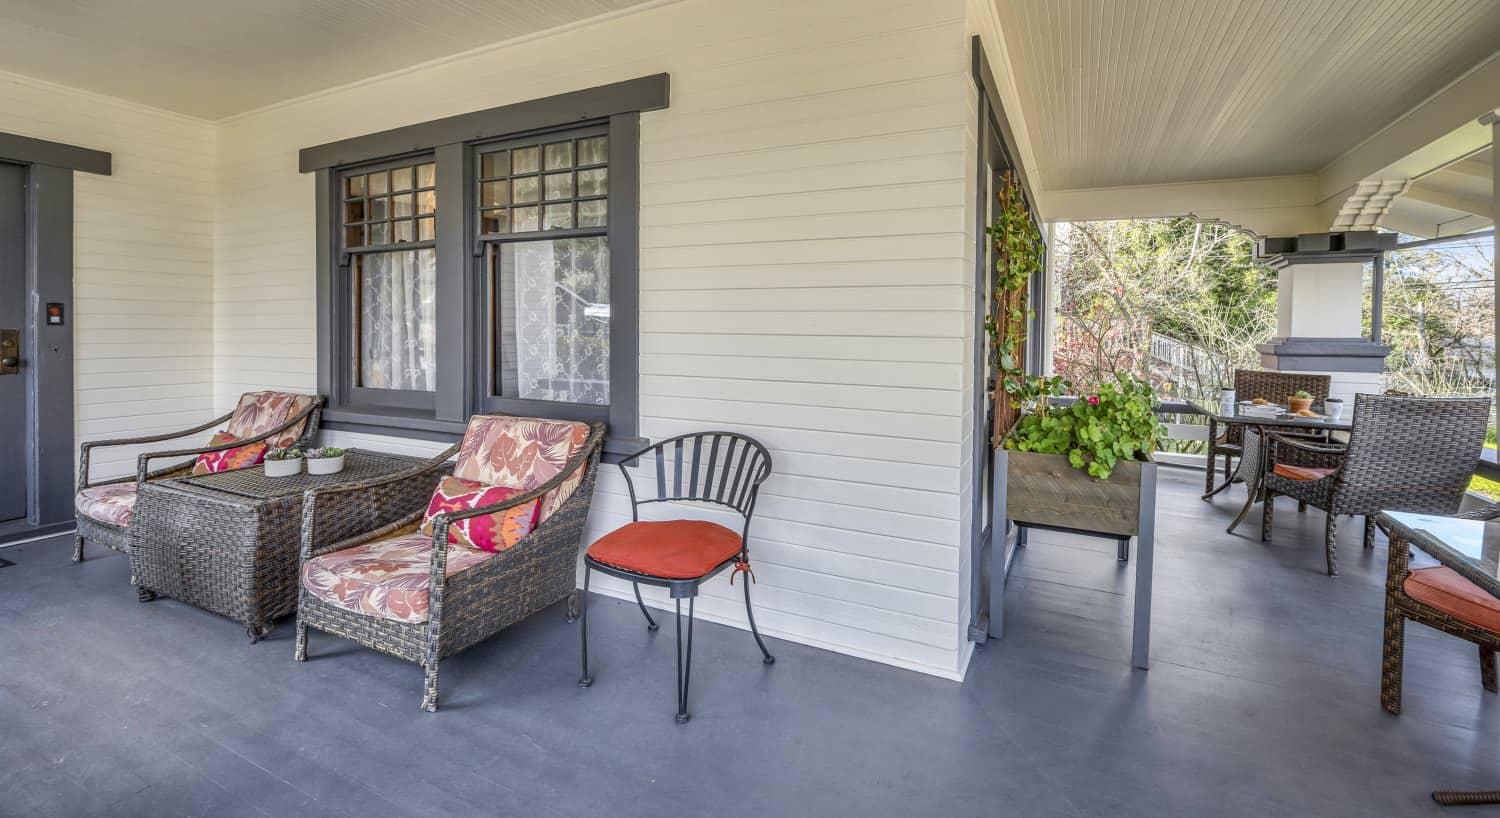 Exterior view of property's front porch with white walls, gray trim, gray flooring, and wicker patio furniture